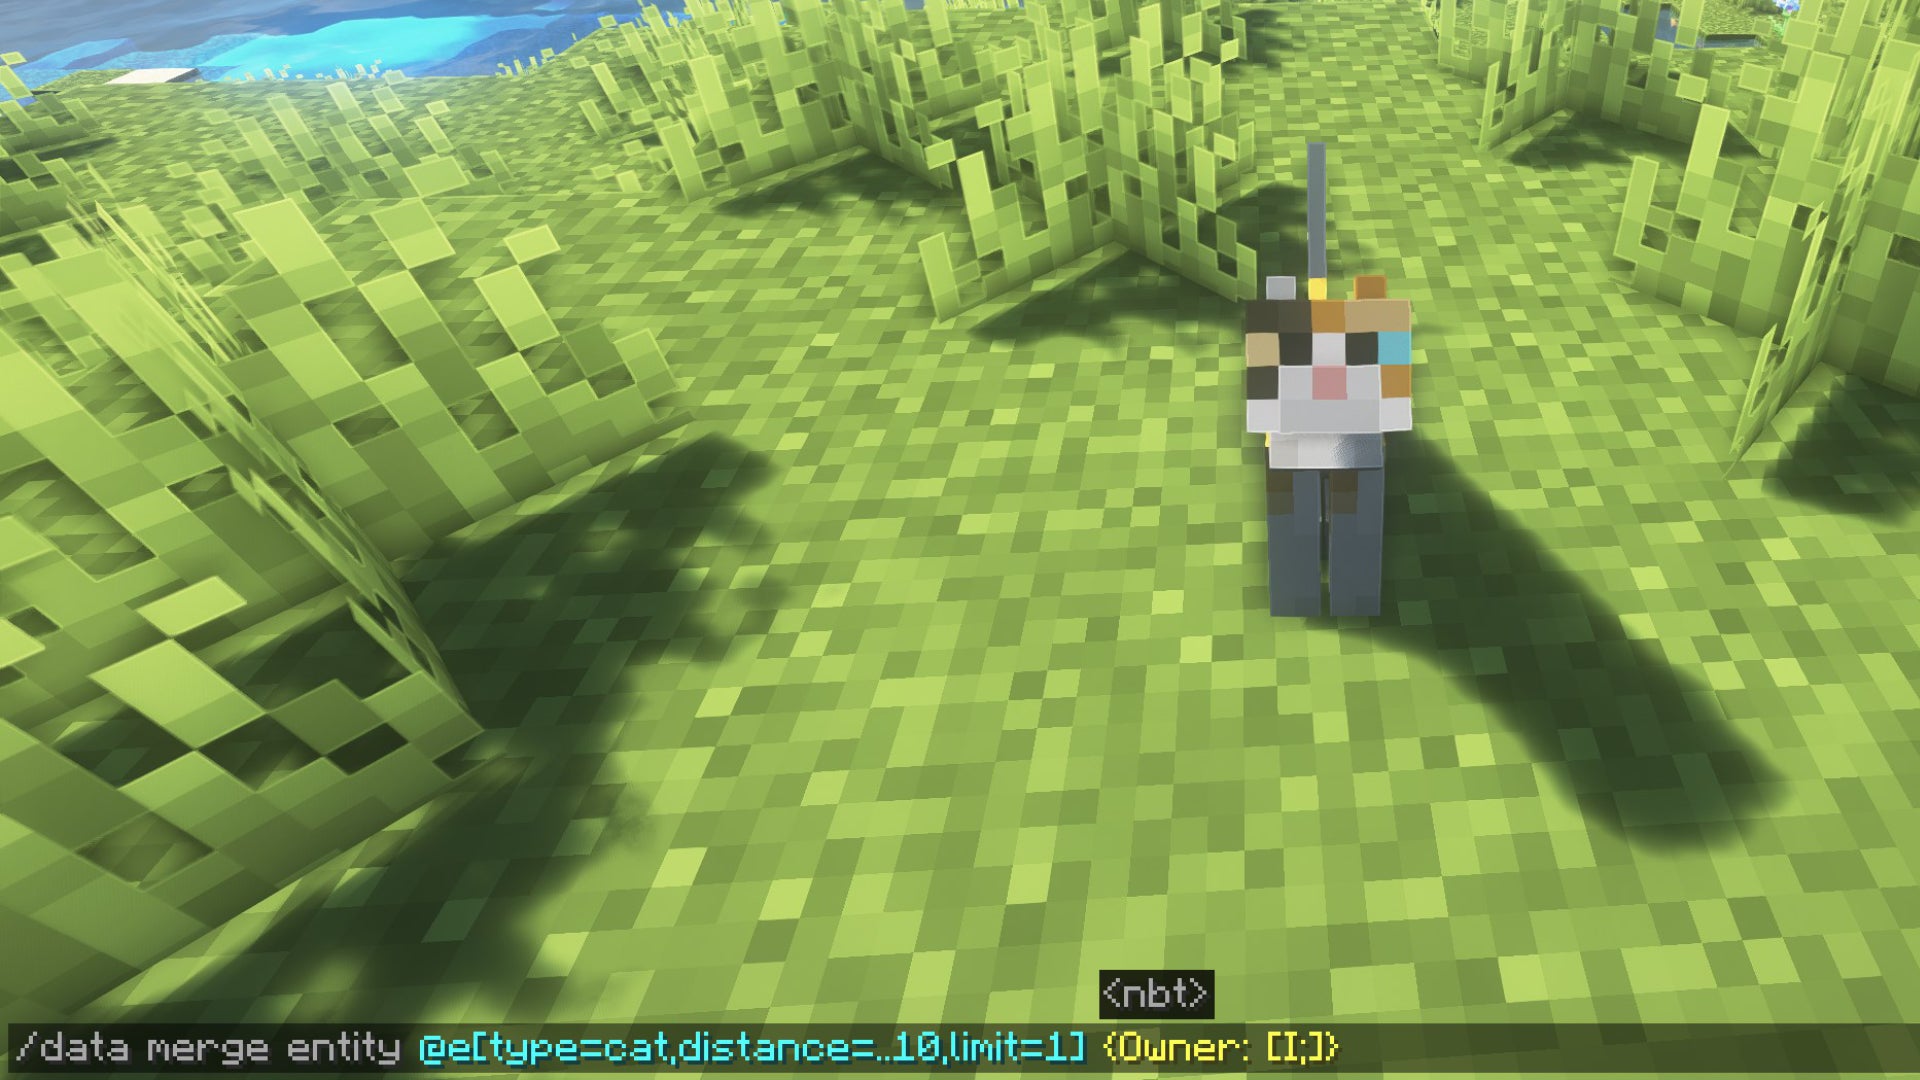 The player in Minecraft looks down at a cat and inputs a command which transfer's ownership of the pet to another player.